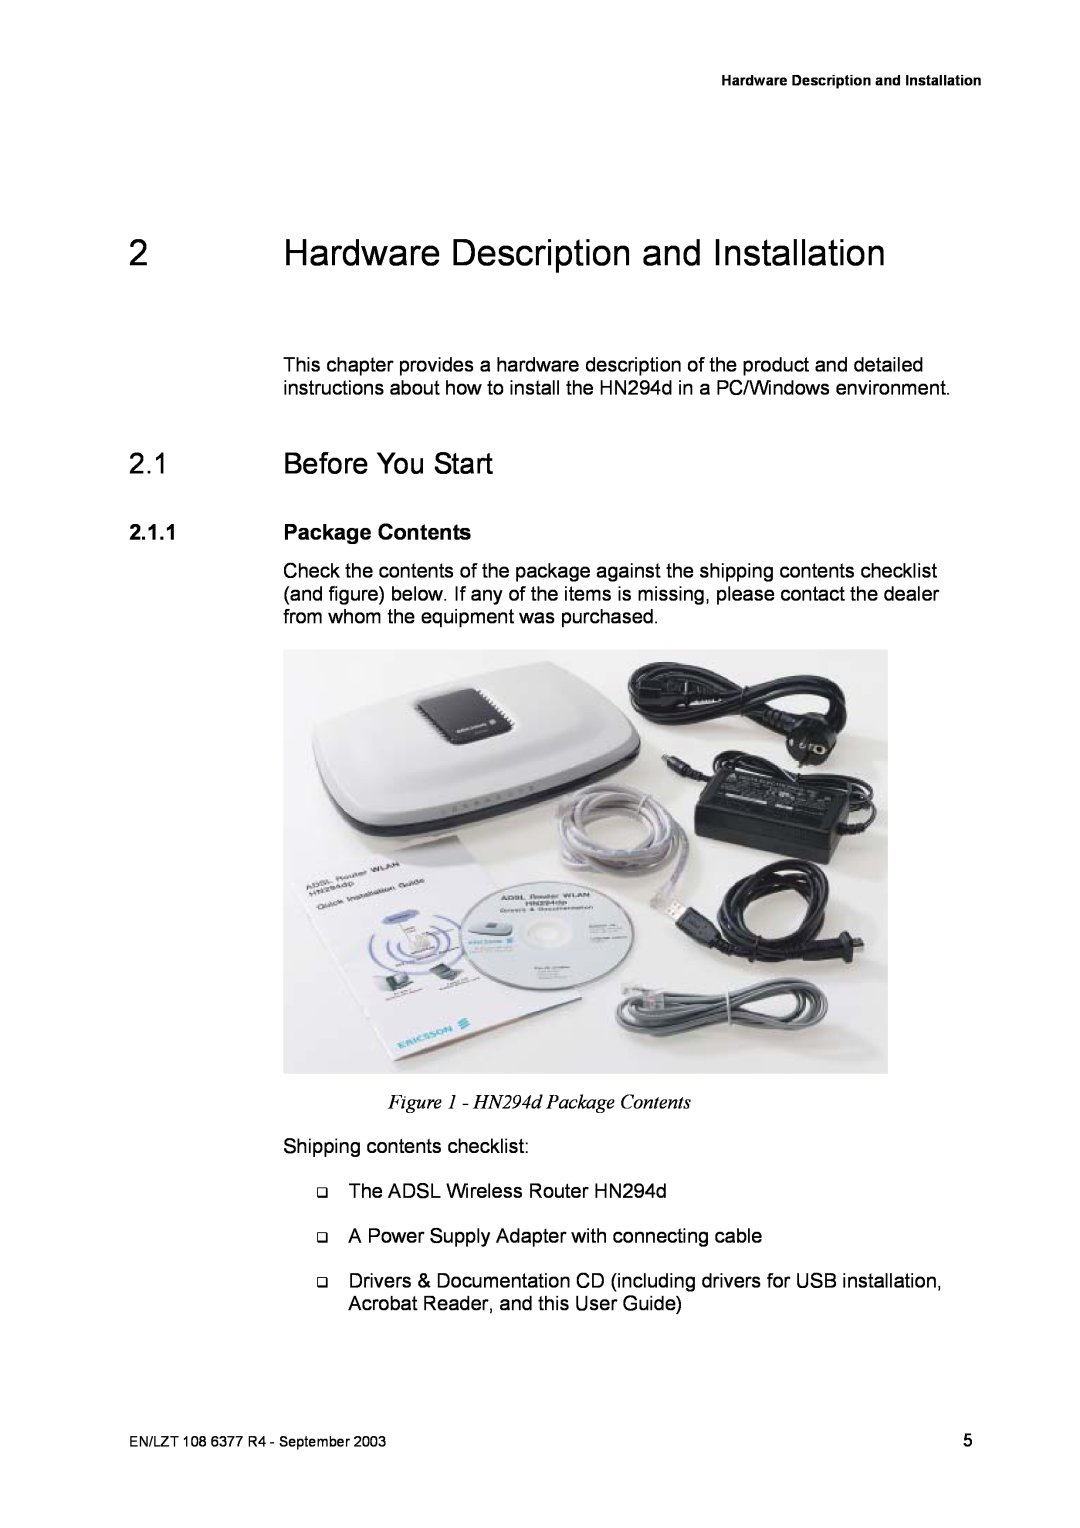 Garmin HN294DP/DI manual Hardware Description and Installation, Before You Start, HN294d Package Contents 